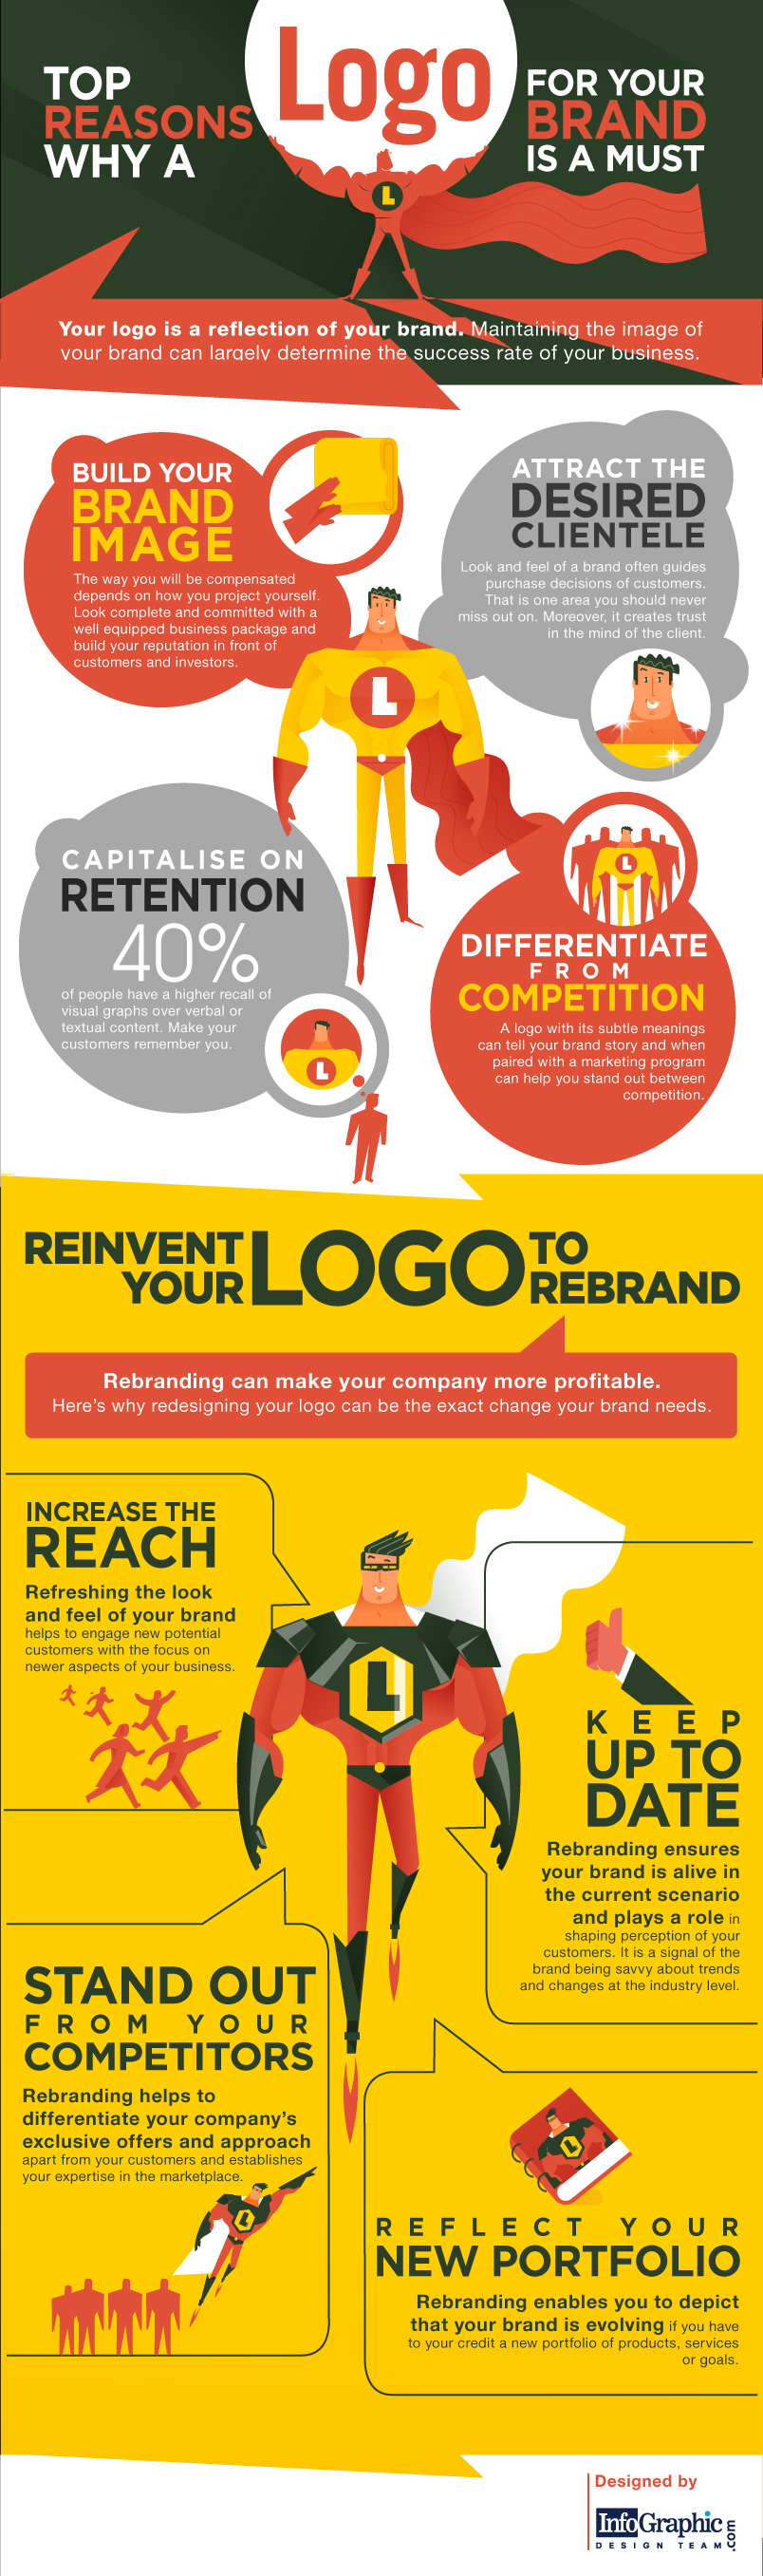 Top Reasons Why A Logo Is A Must For Your Brand